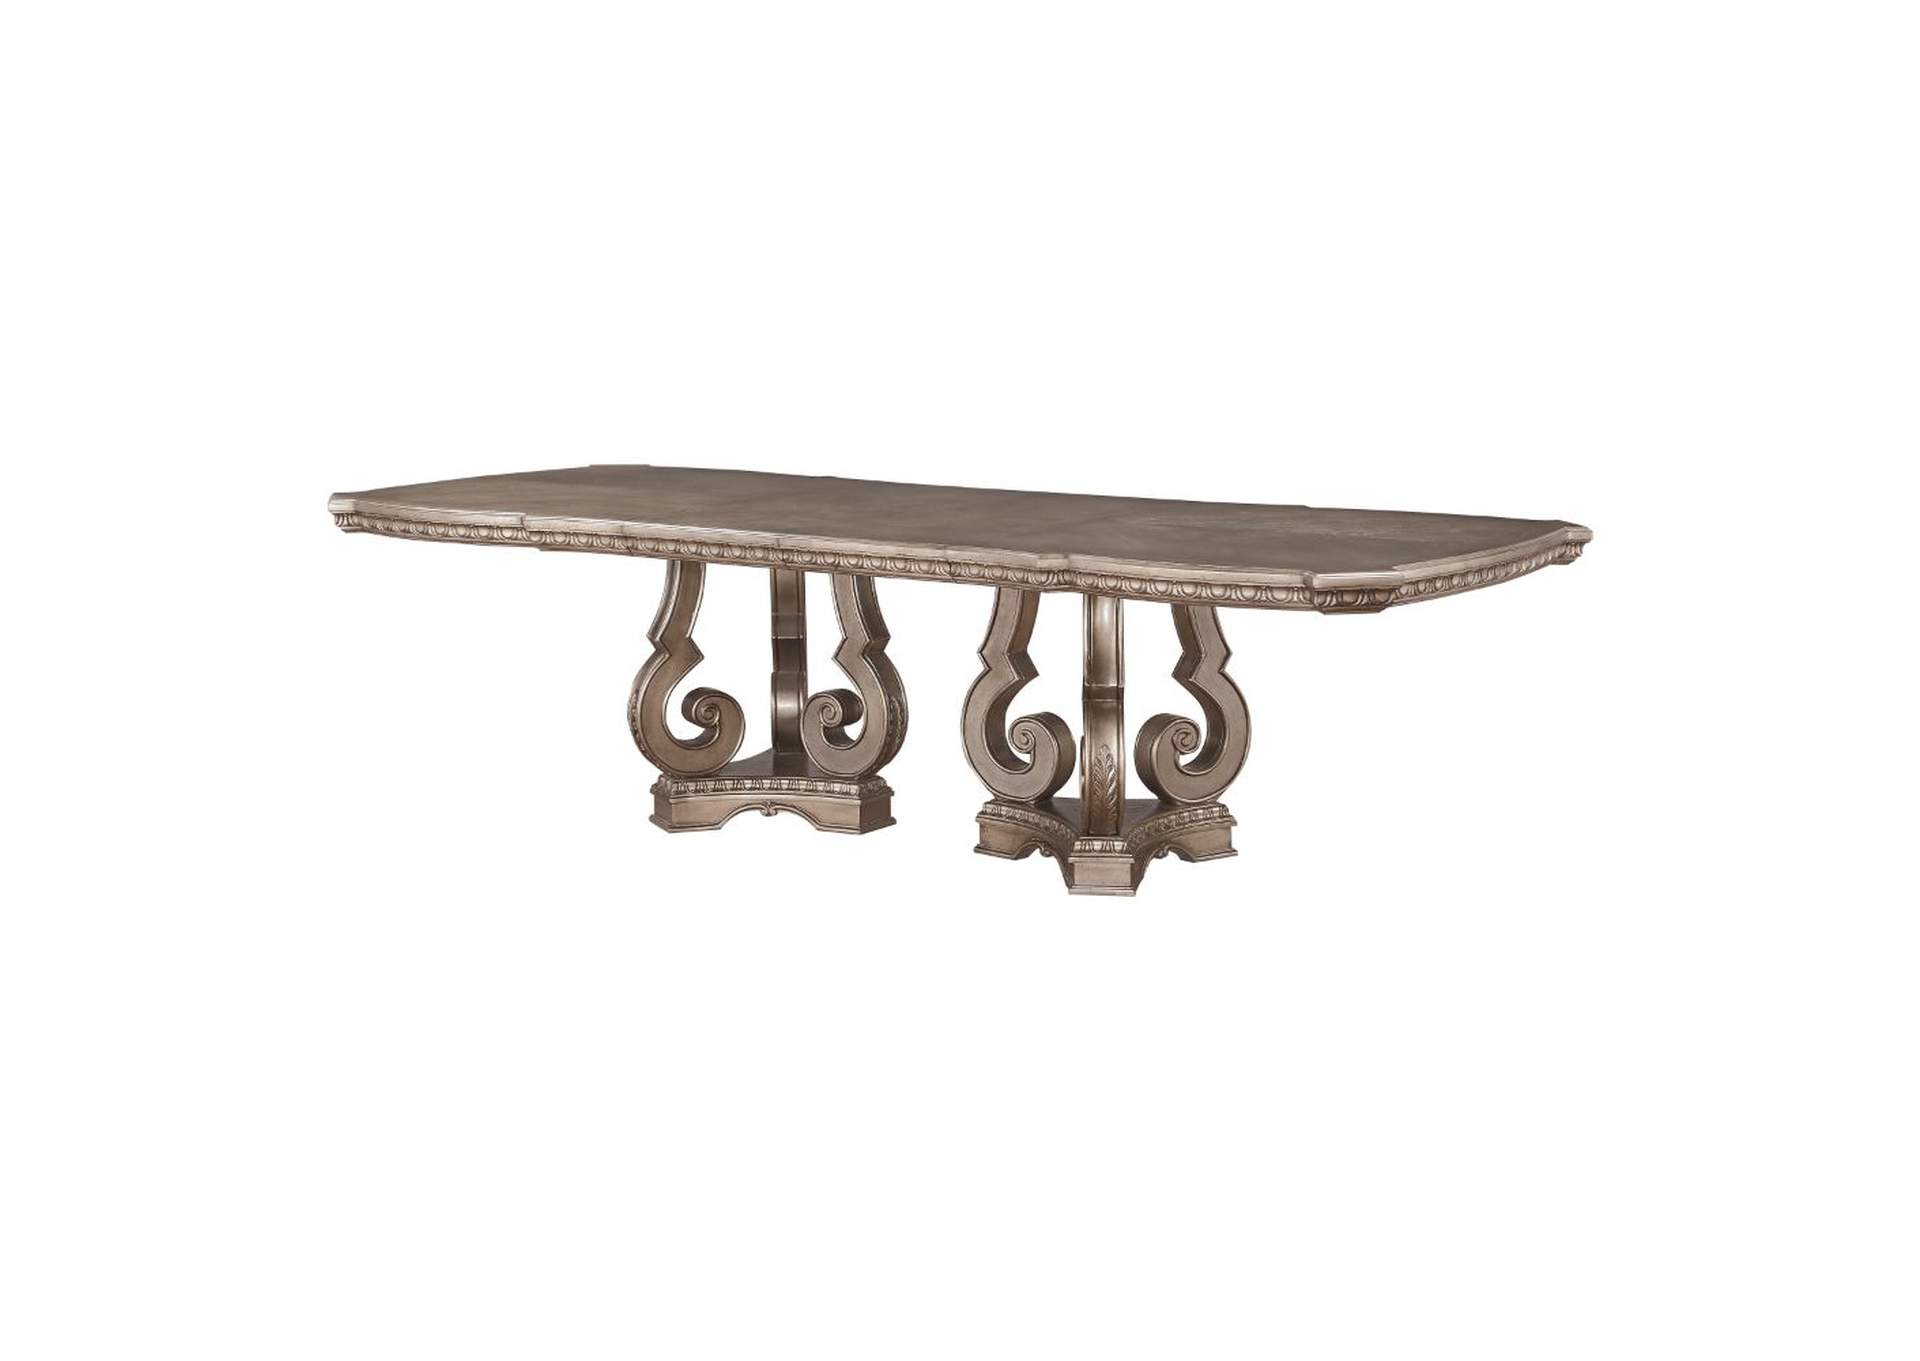 Northville Dining table,Acme